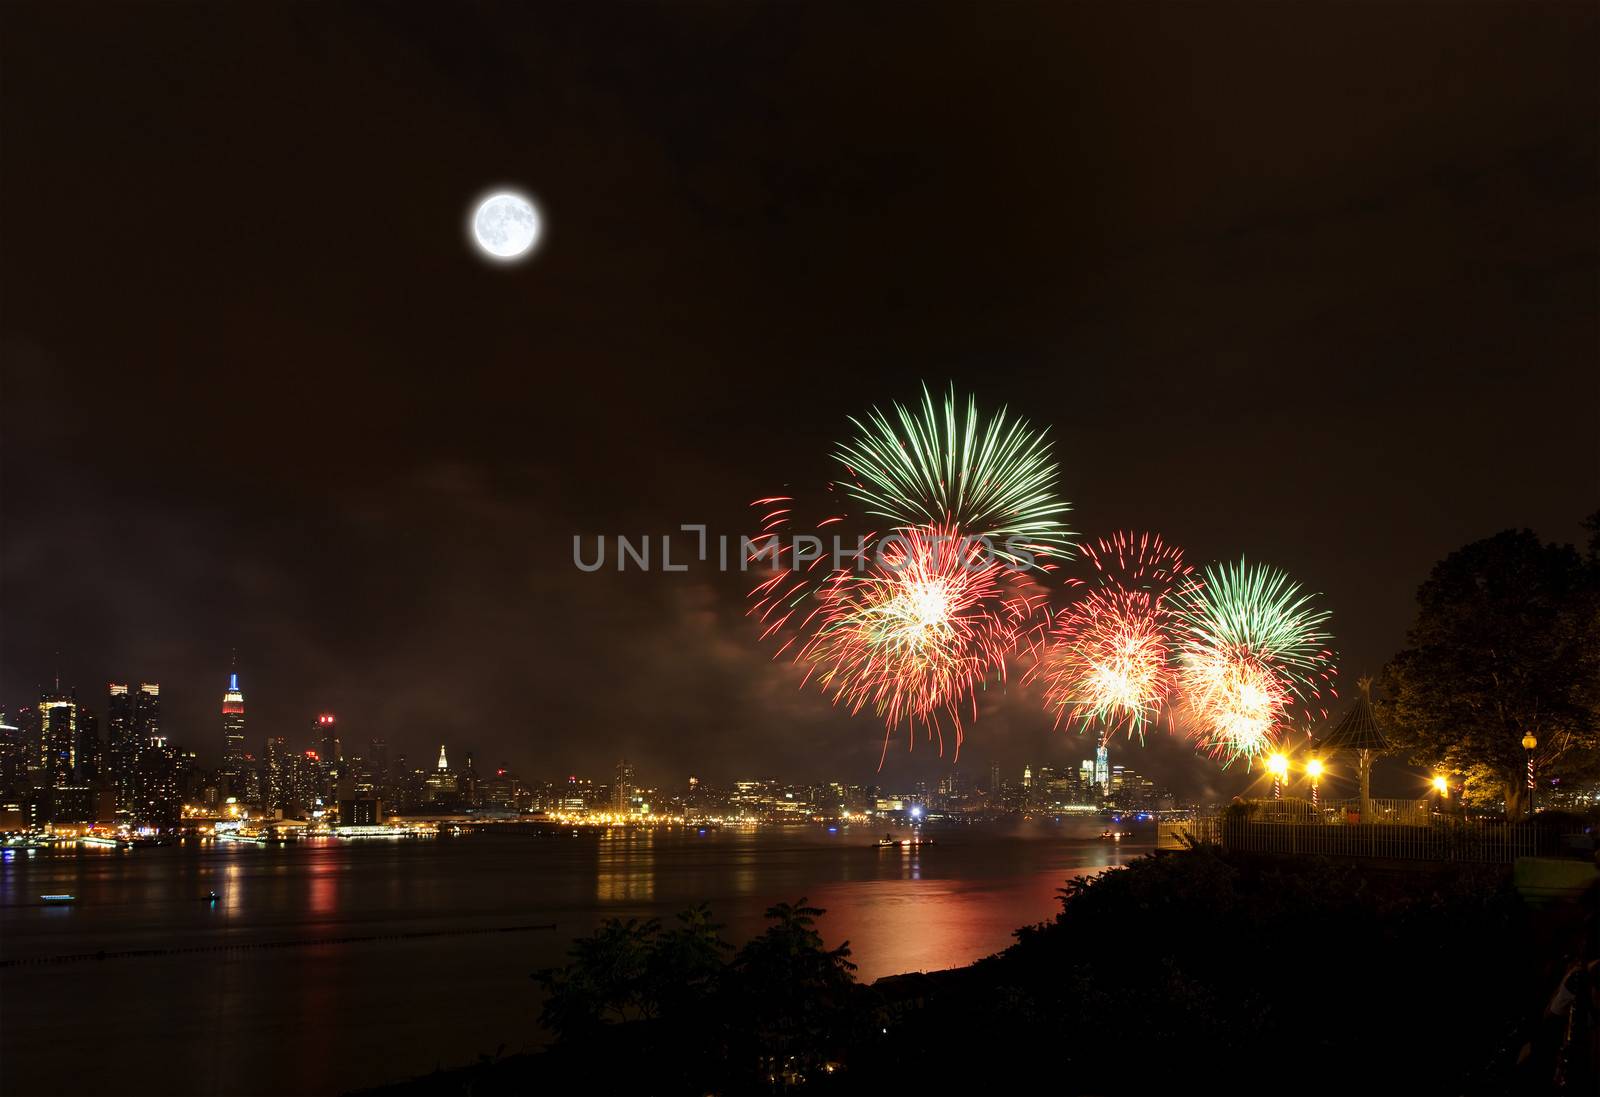 The July 4th firework over Hudson River in New York City